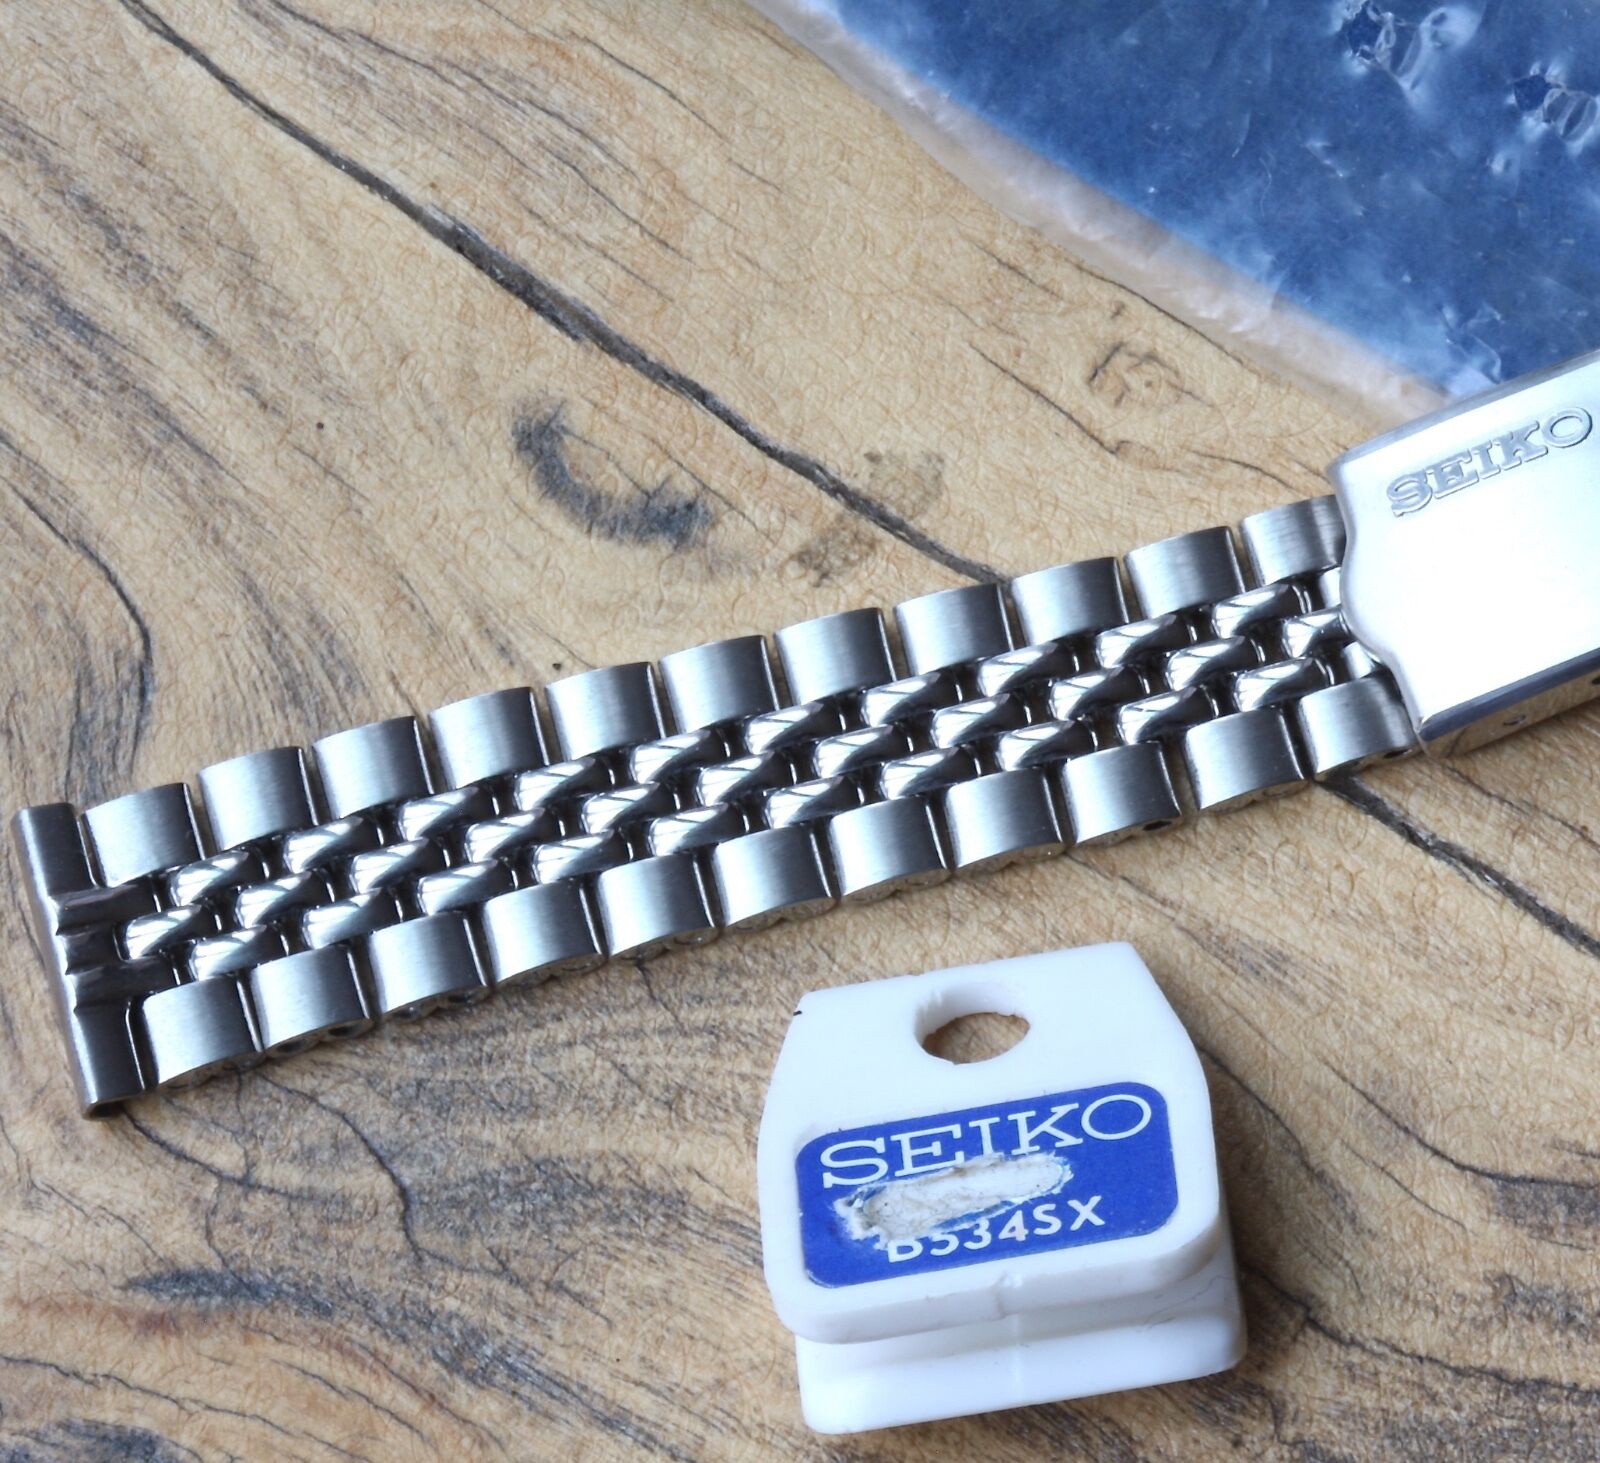 Vintage Seiko watch bracelet Beads of Rice 13mm or 14mm straight ends  1960s/70s | eBay